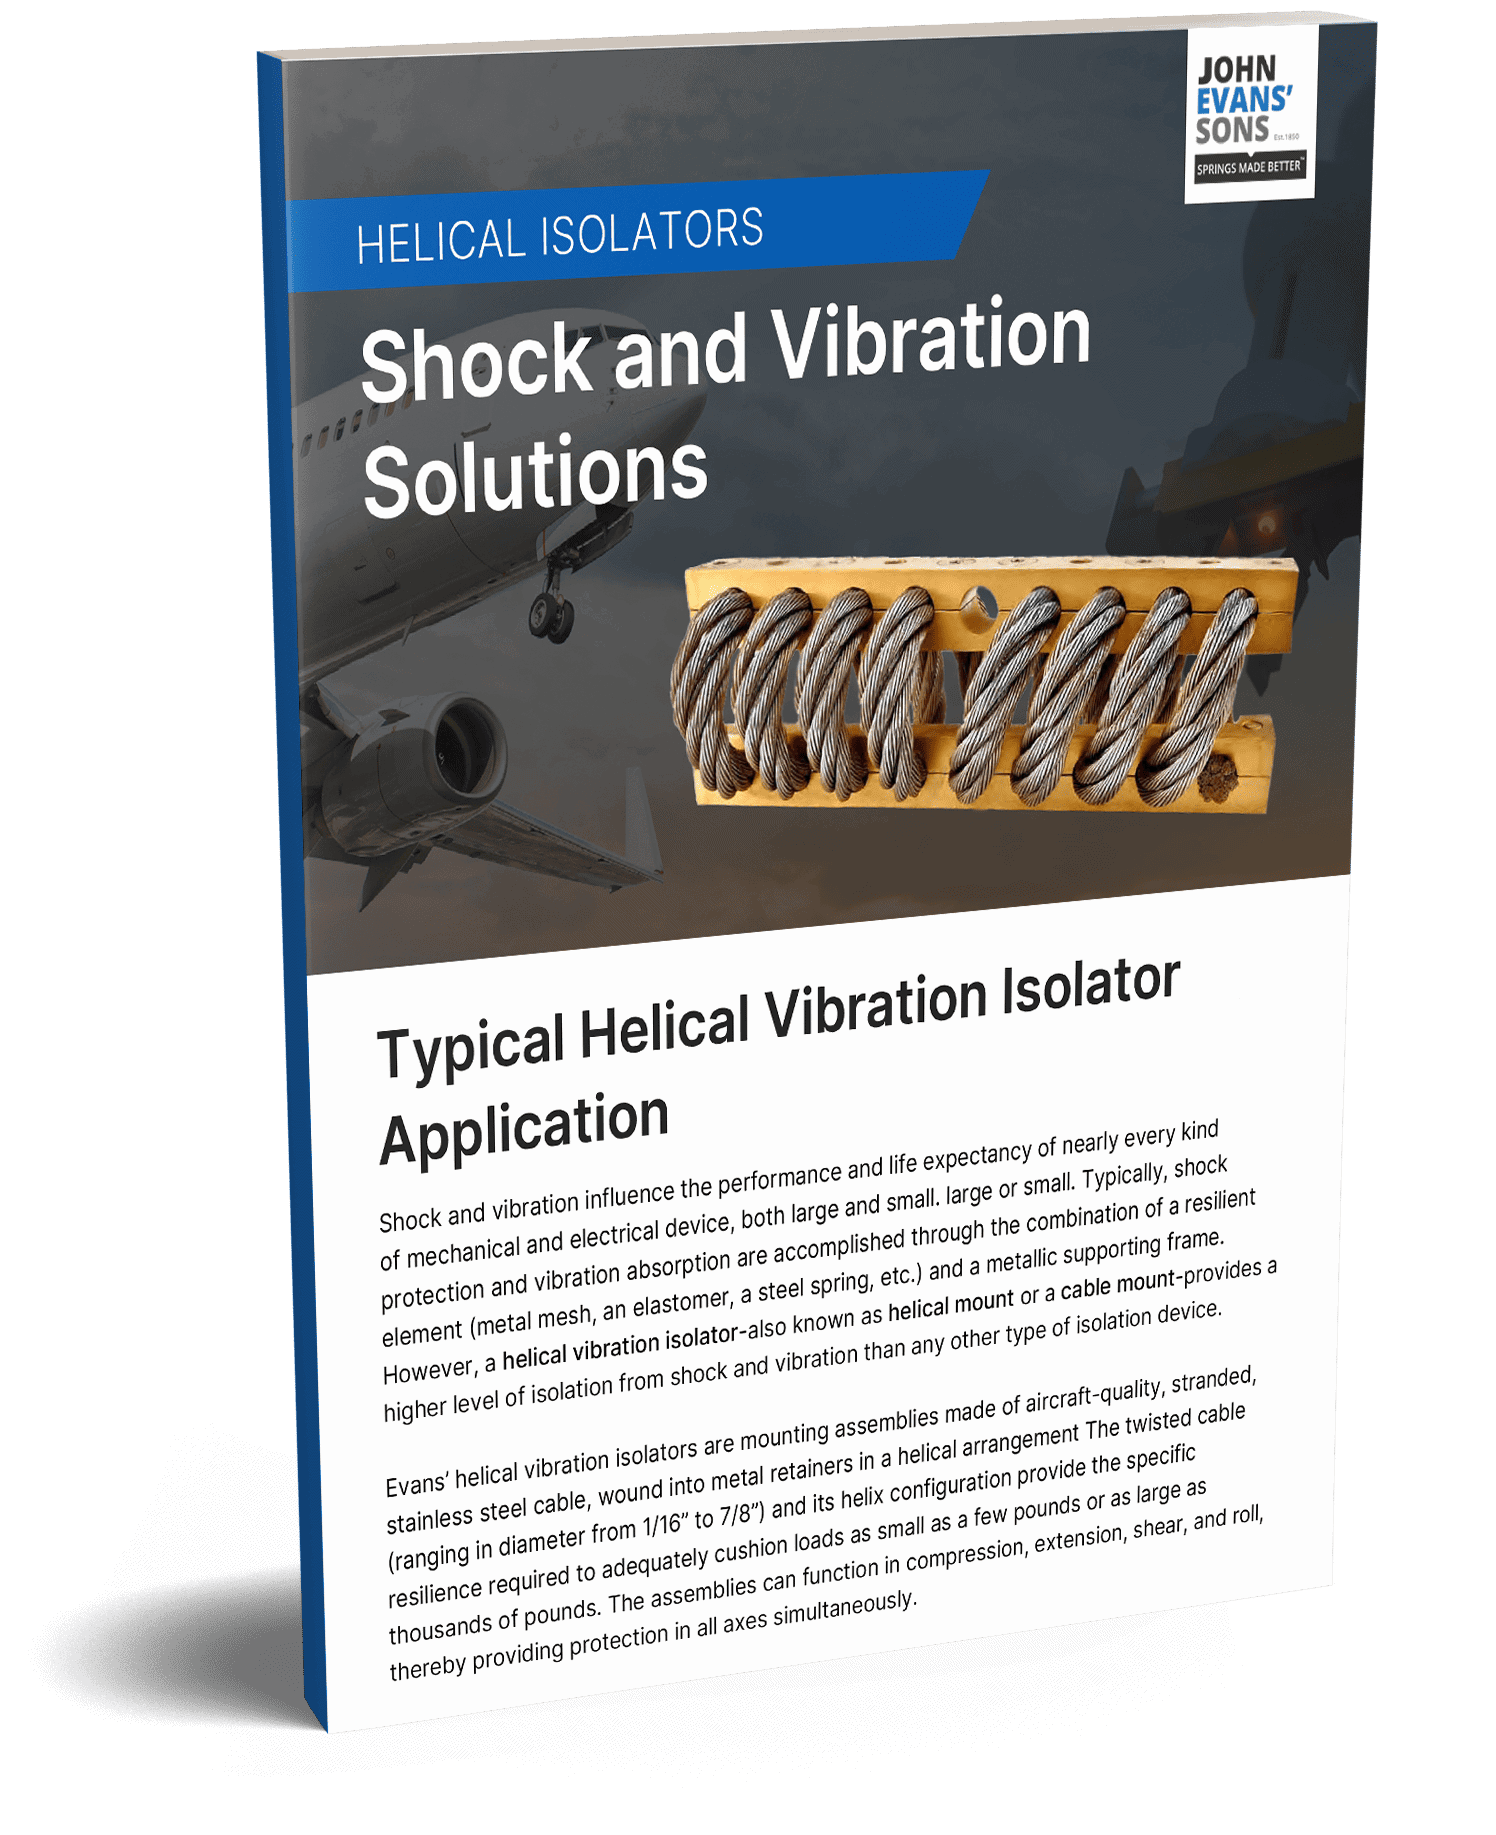 Helical Isolators: Shock and Vibration Solutions